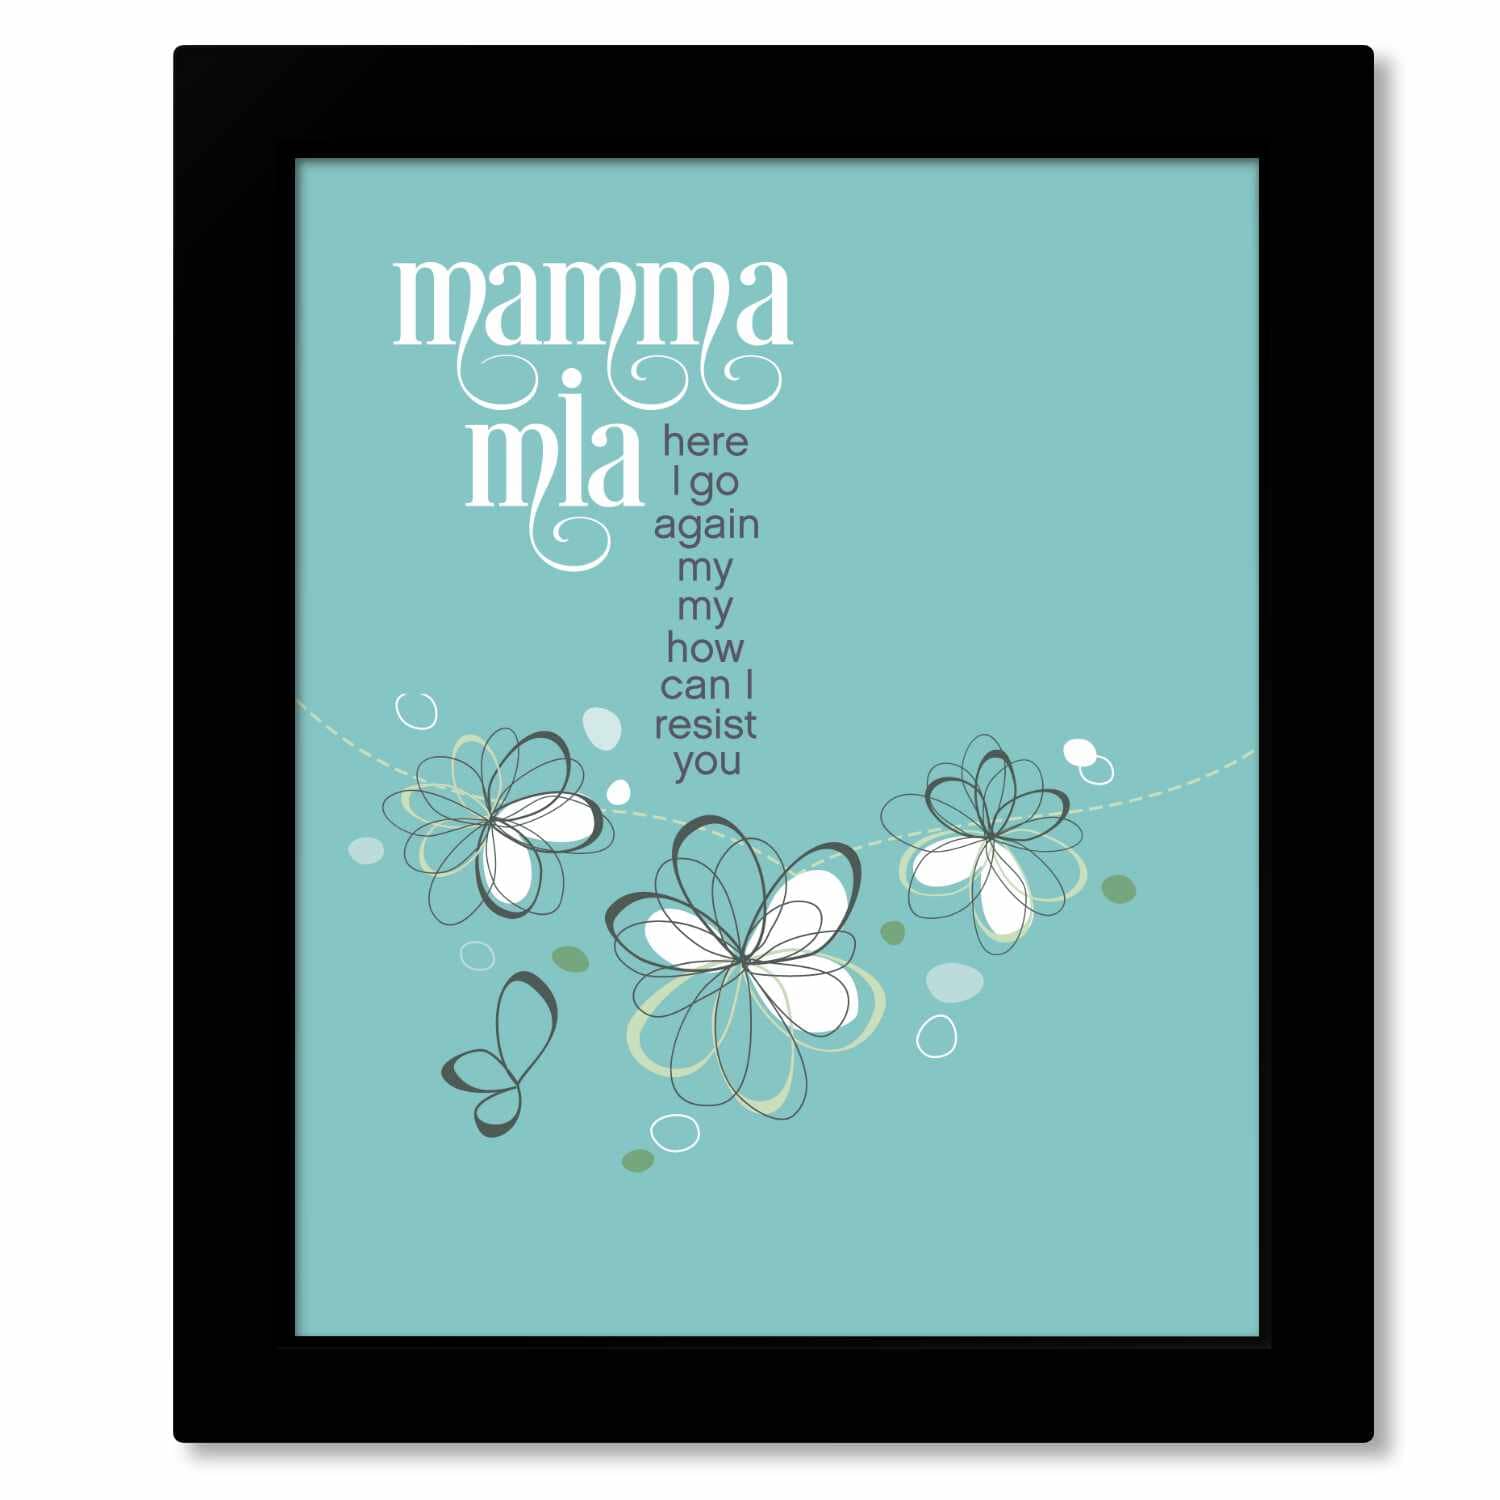 Mamma Mia by ABBA - Song Lyric Pop Music Wall Art Print Song Lyrics Art Song Lyrics Art 8x10 Framed Print (without mat) 